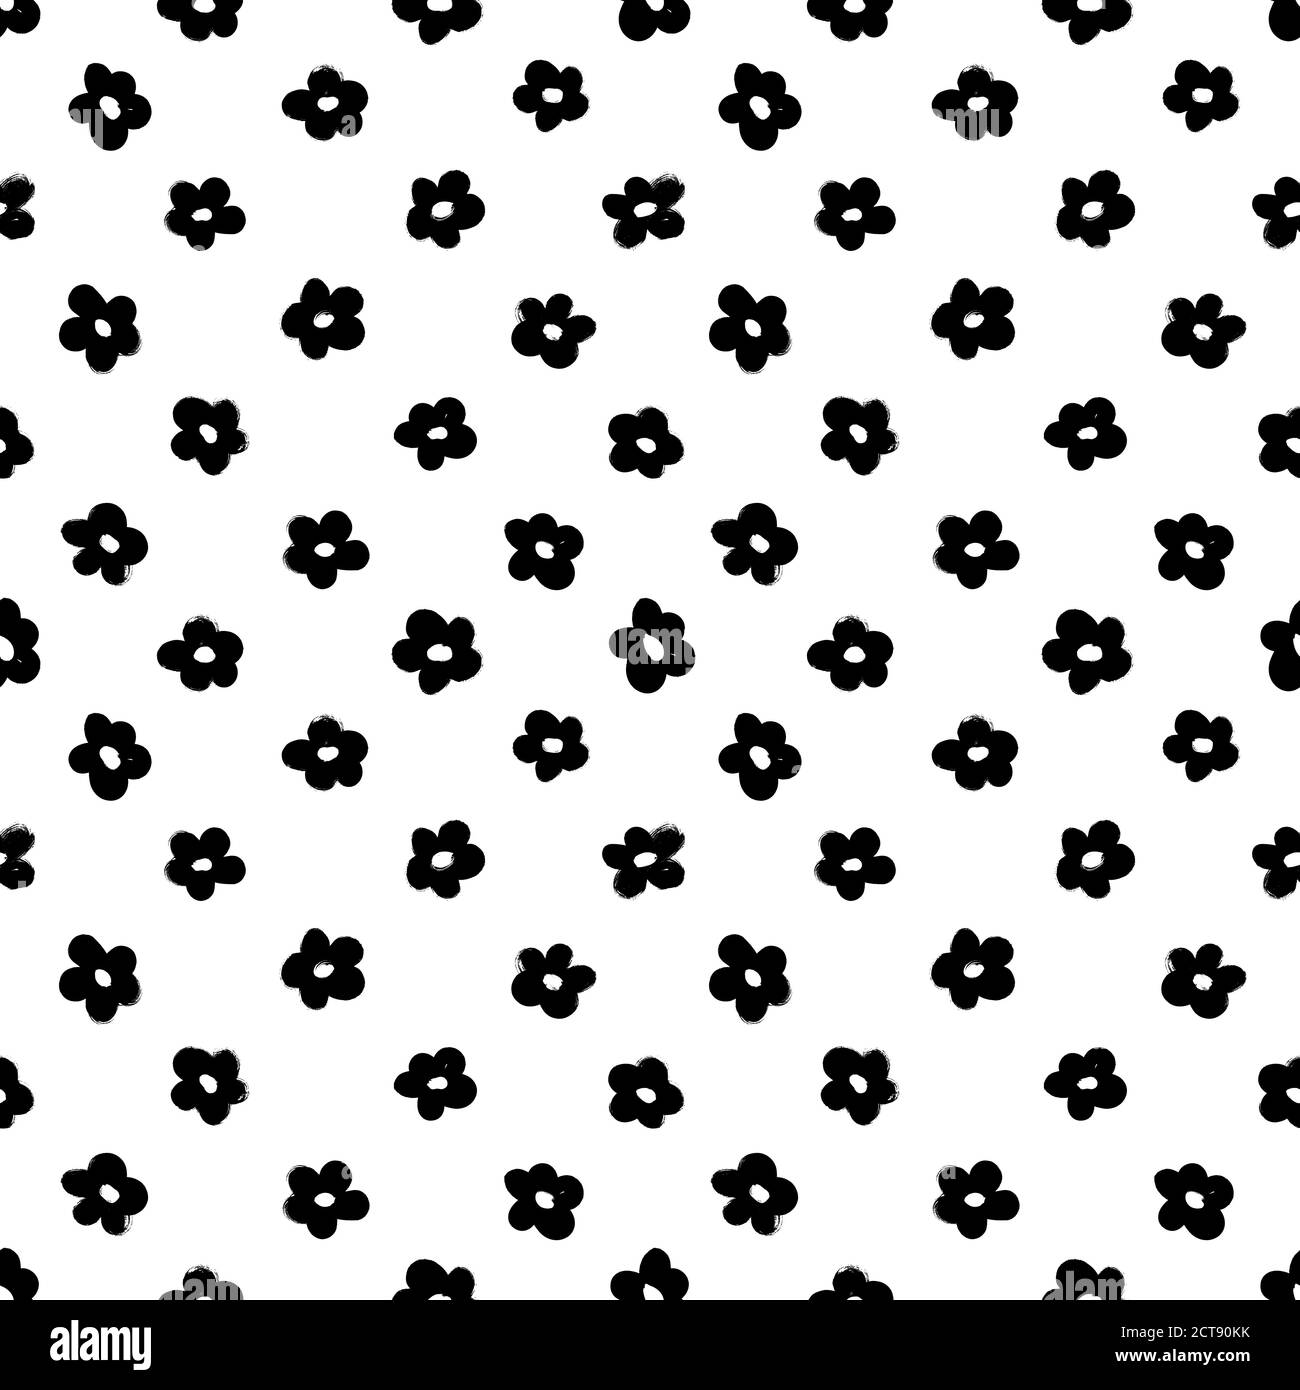 Black abstract flowers vector seamless pattern. Stock Vector